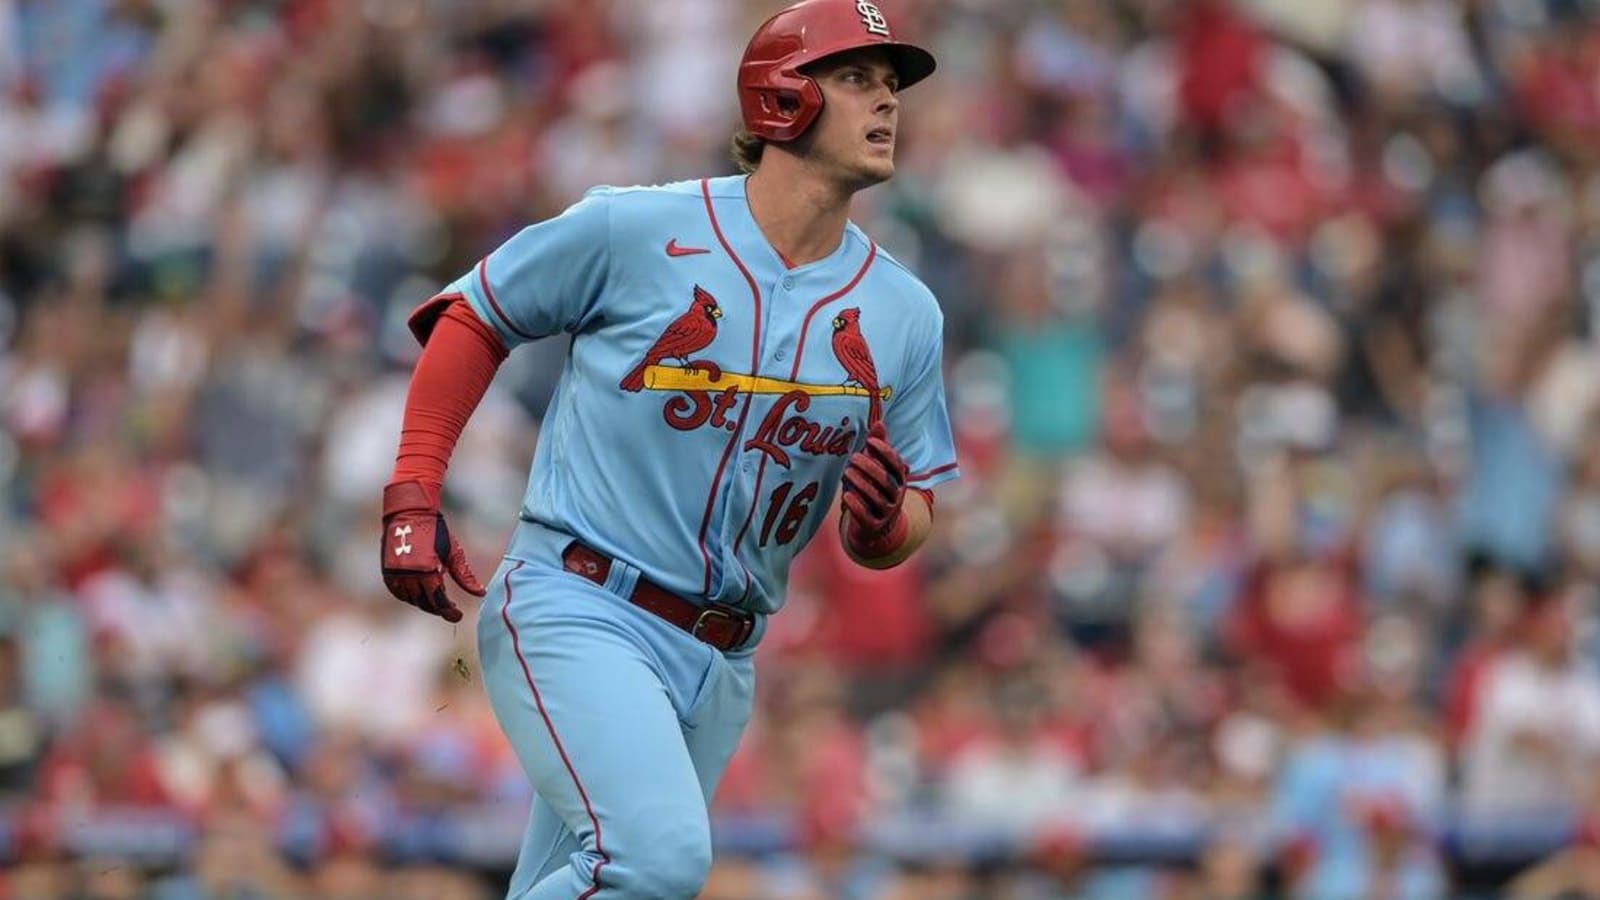 MLB roundup: Cardinals make history with 4 straight HRs in win